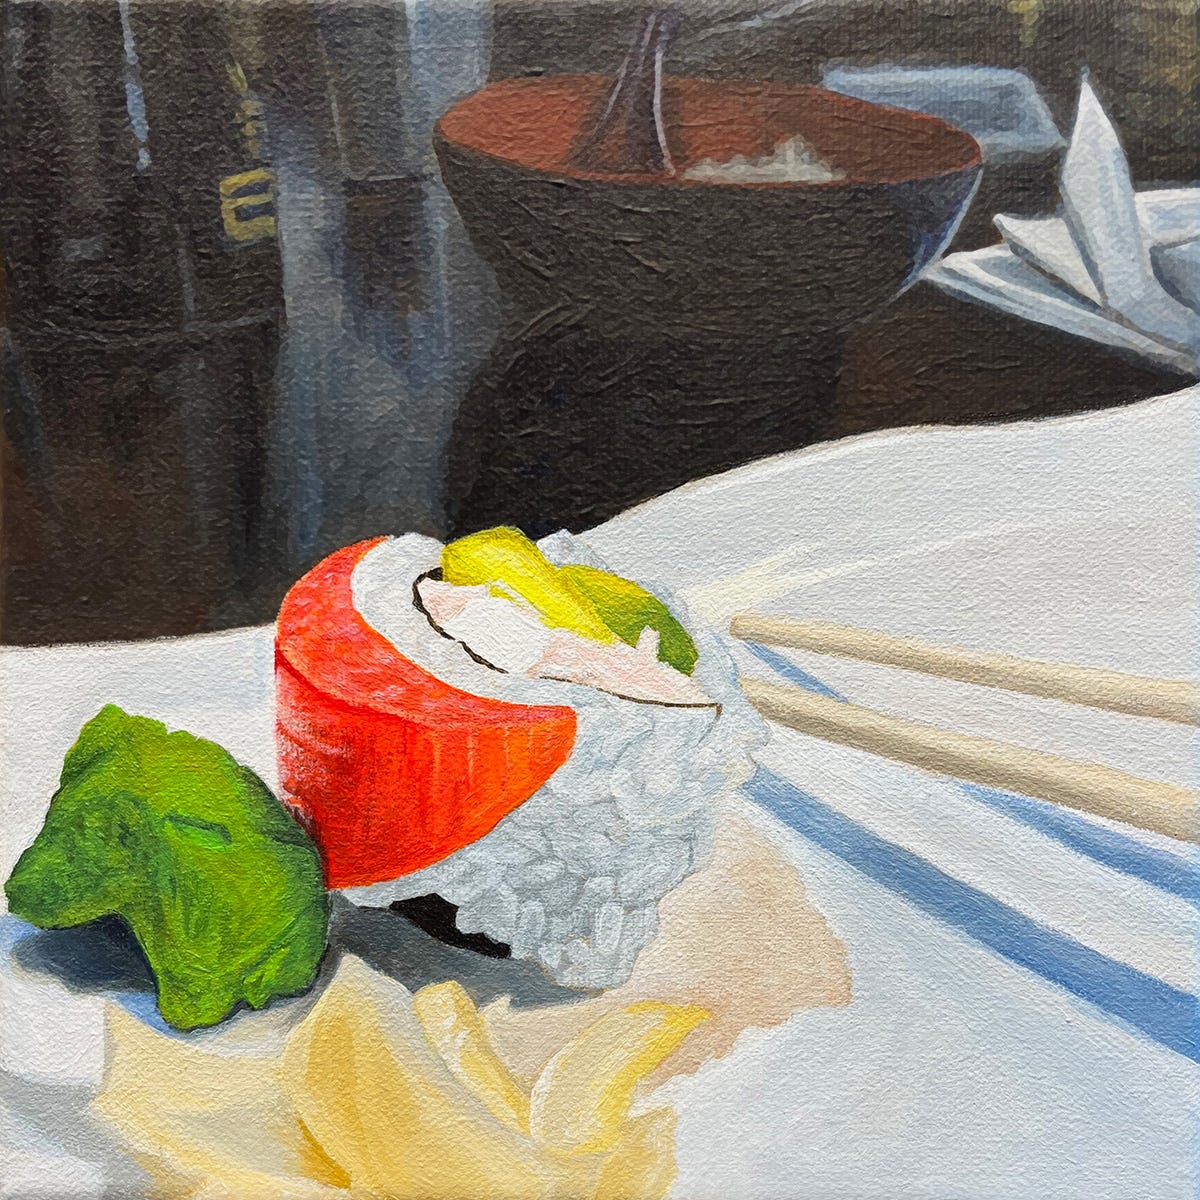 Painting of a single piece of a salmon sushi roll on a white dish next to a pair of chopsticks, ginger and wasabi. In the darkened background there is a black bowl with a red interior containing rice and a bottle of soy sauce.